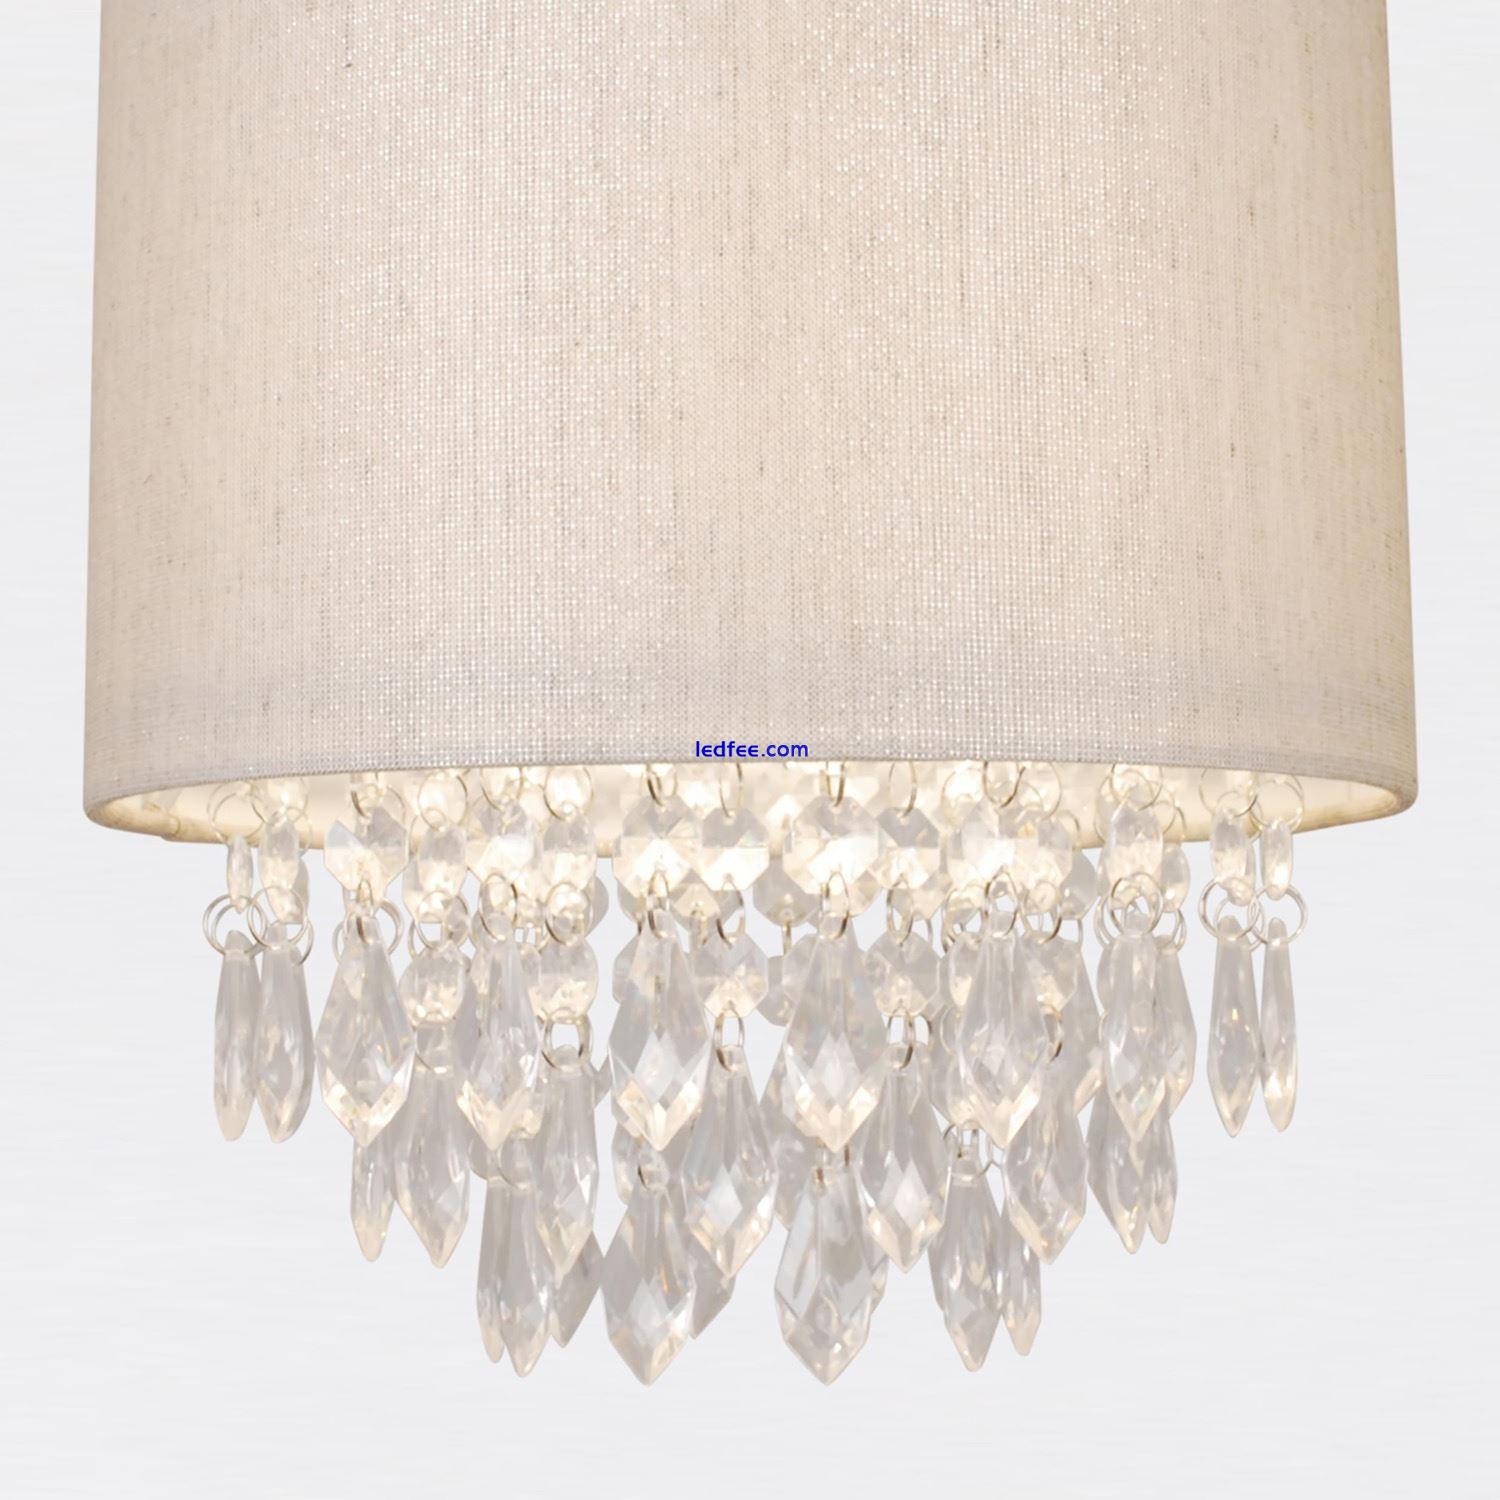 Sparkle Pale Gold Faux Silk 25cm Jewelled Ceiling Lightshade Pendant Shade 1 